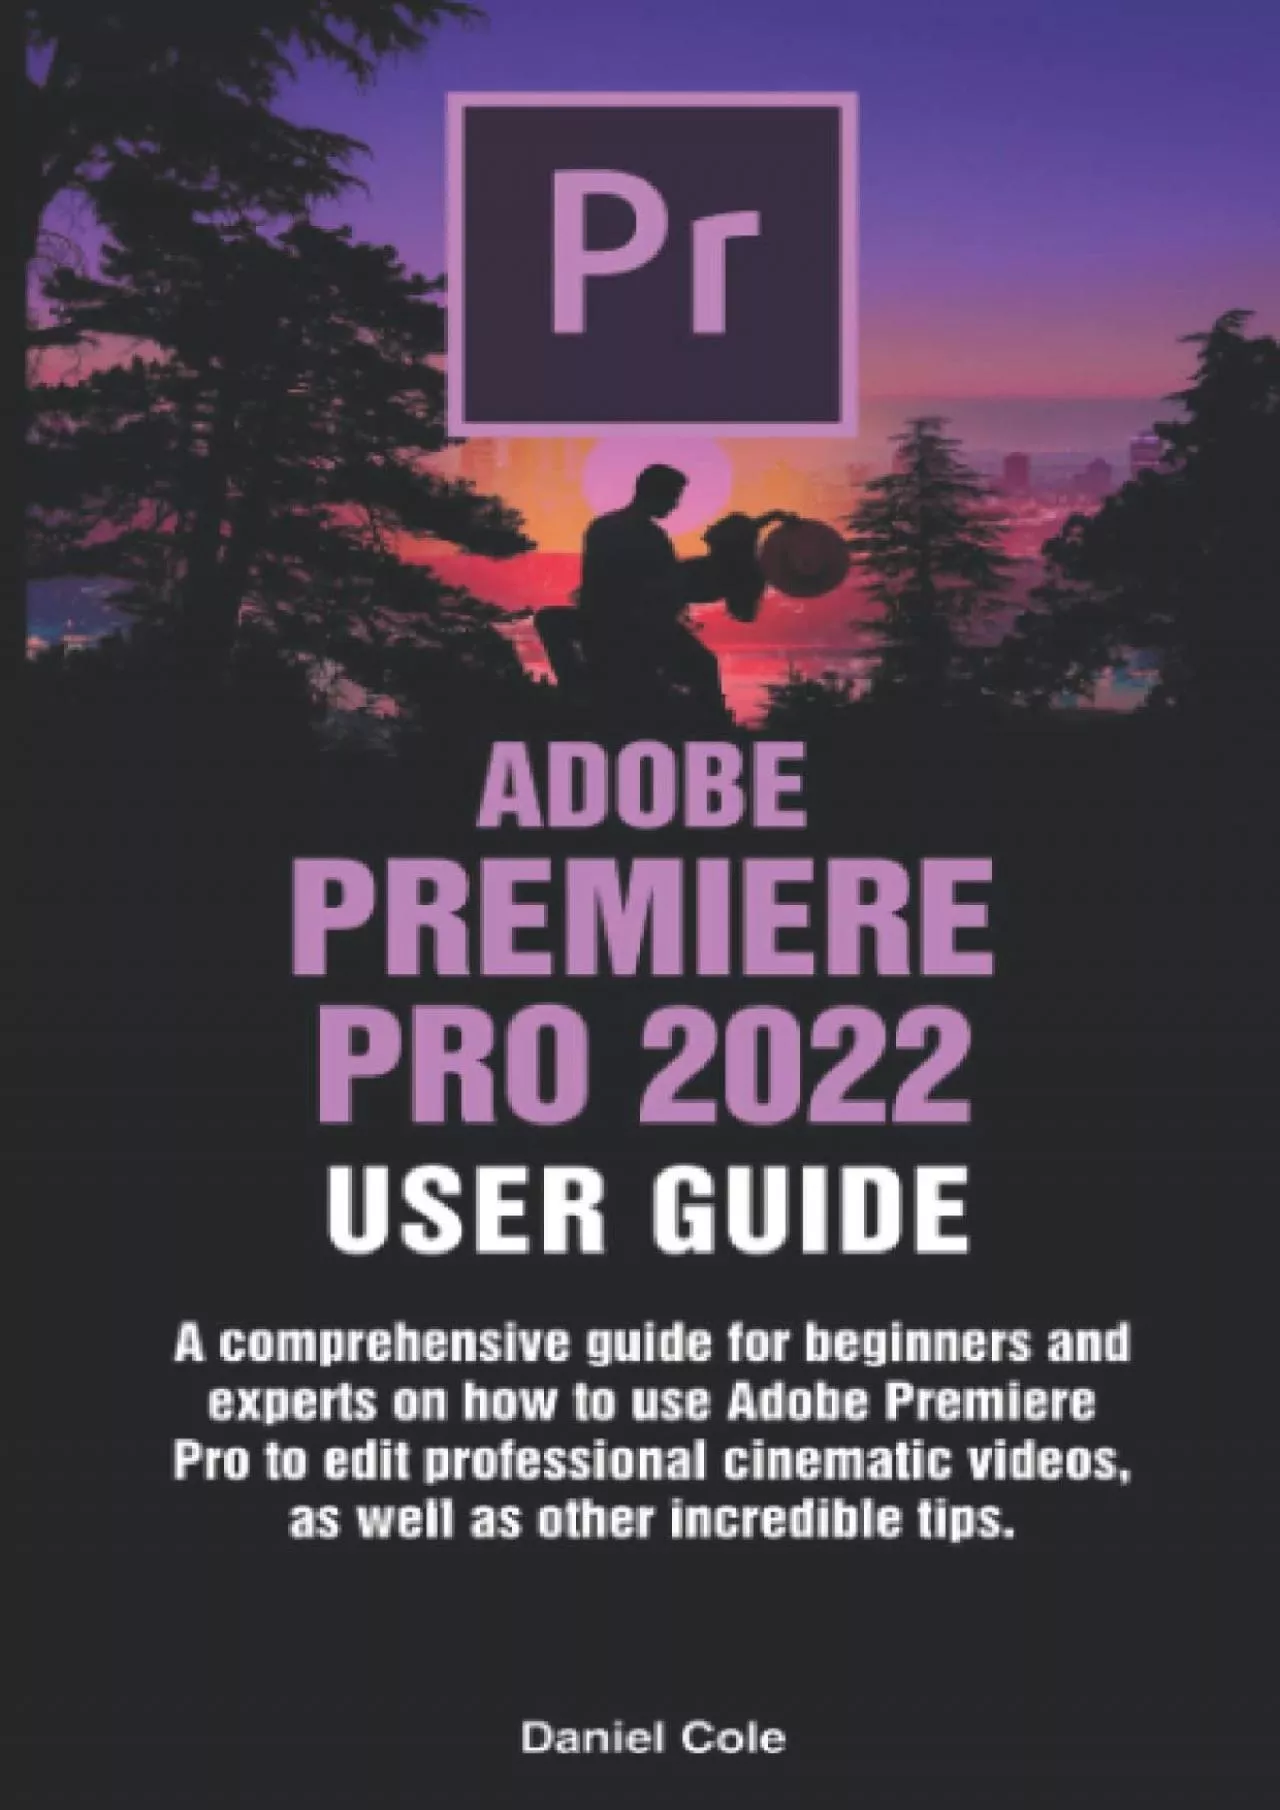 (BOOK)-ADOBE PREMIERE PRO 2022 USER GUIDE: A comprehensive guide for beginners and experts